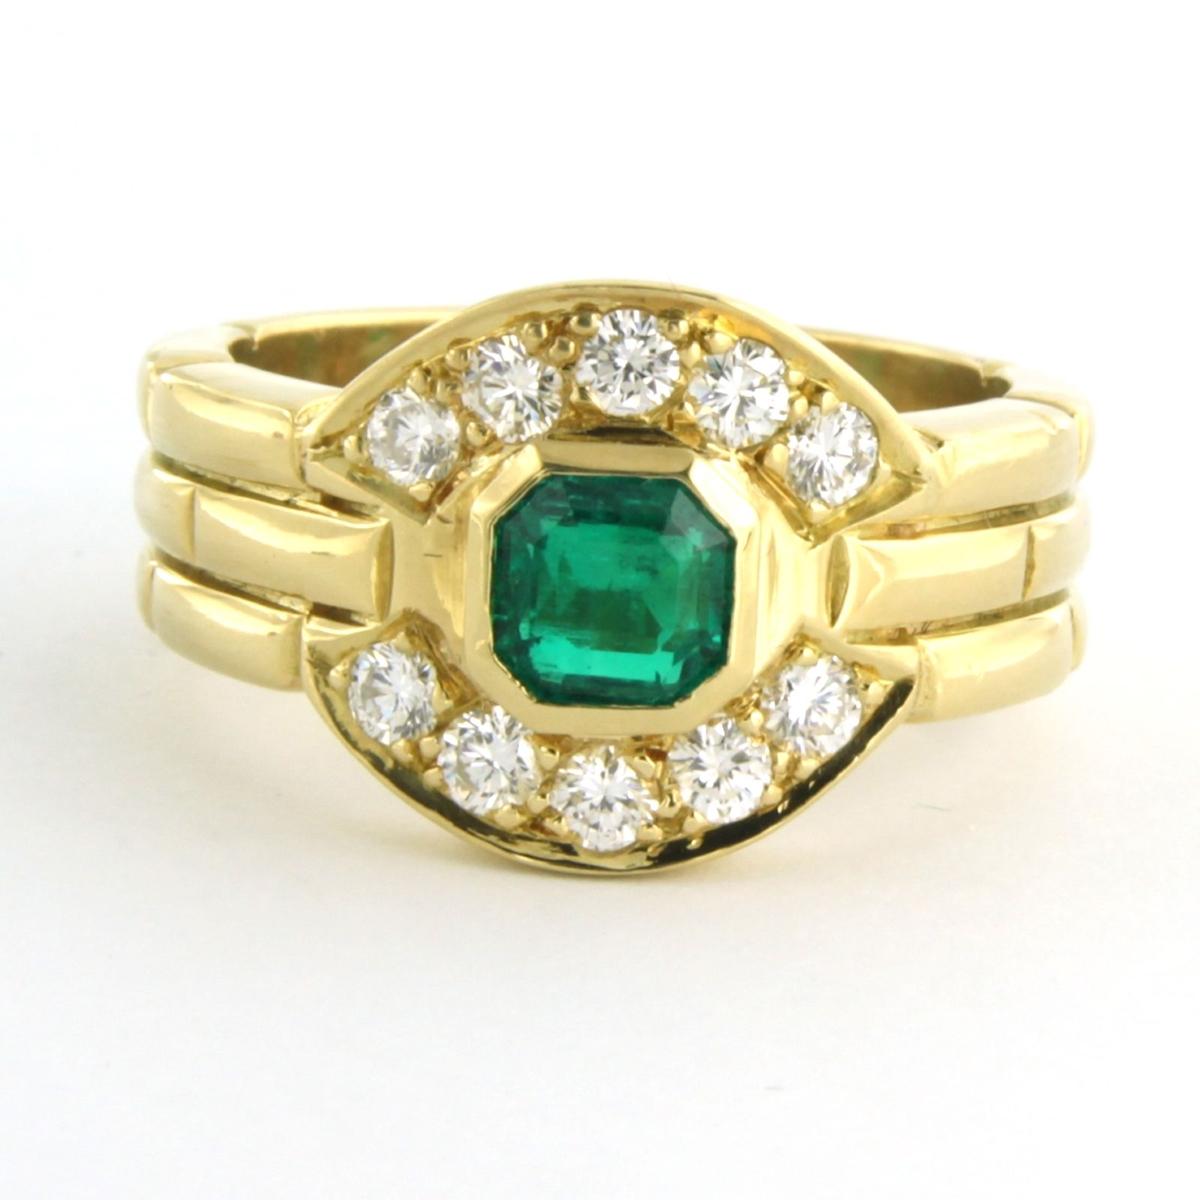 18 kt yellow gold ring set with emerald ​​and brilliant cut diamond total 0.50 carat F/G VS/SI - ring size U.S. 6.75 - EU. 17.25(54)

detailed description

The top of the ring is 1.3 cm wide and 4.6 mm high

weight 10.5 grams

ring size U.S. 6.75 -